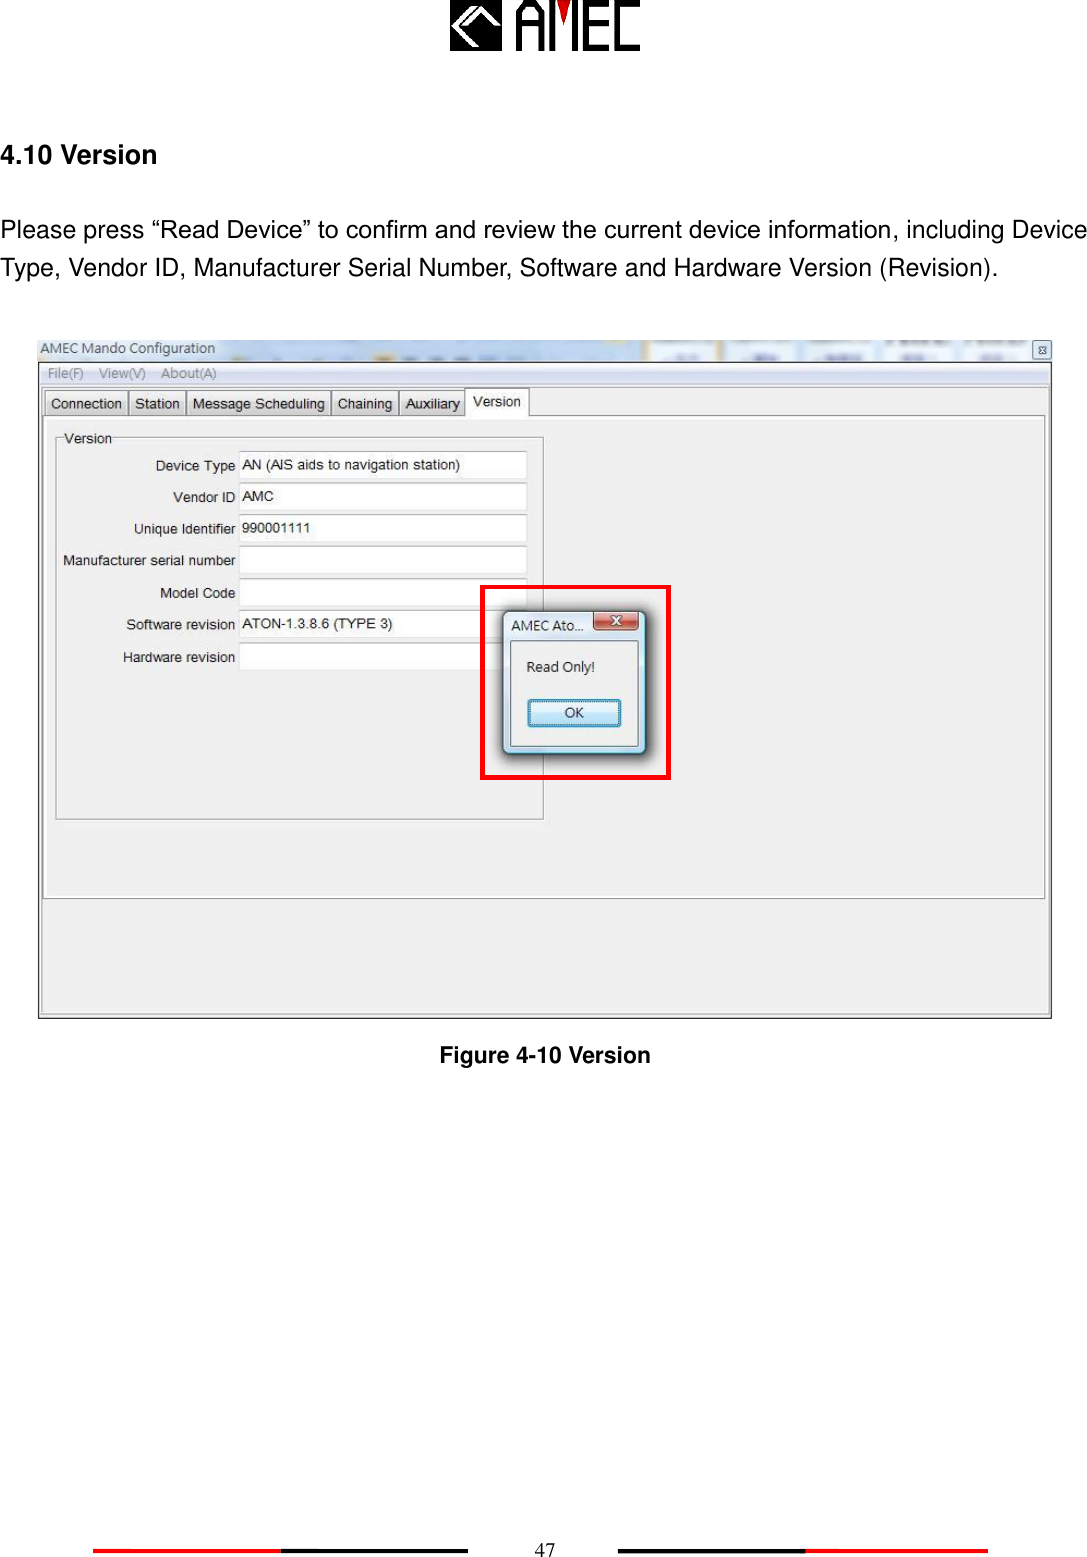    47 4.10 Version Please press “Read Device” to confirm and review the current device information, including Device Type, Vendor ID, Manufacturer Serial Number, Software and Hardware Version (Revision).   Figure 4-10 Version  